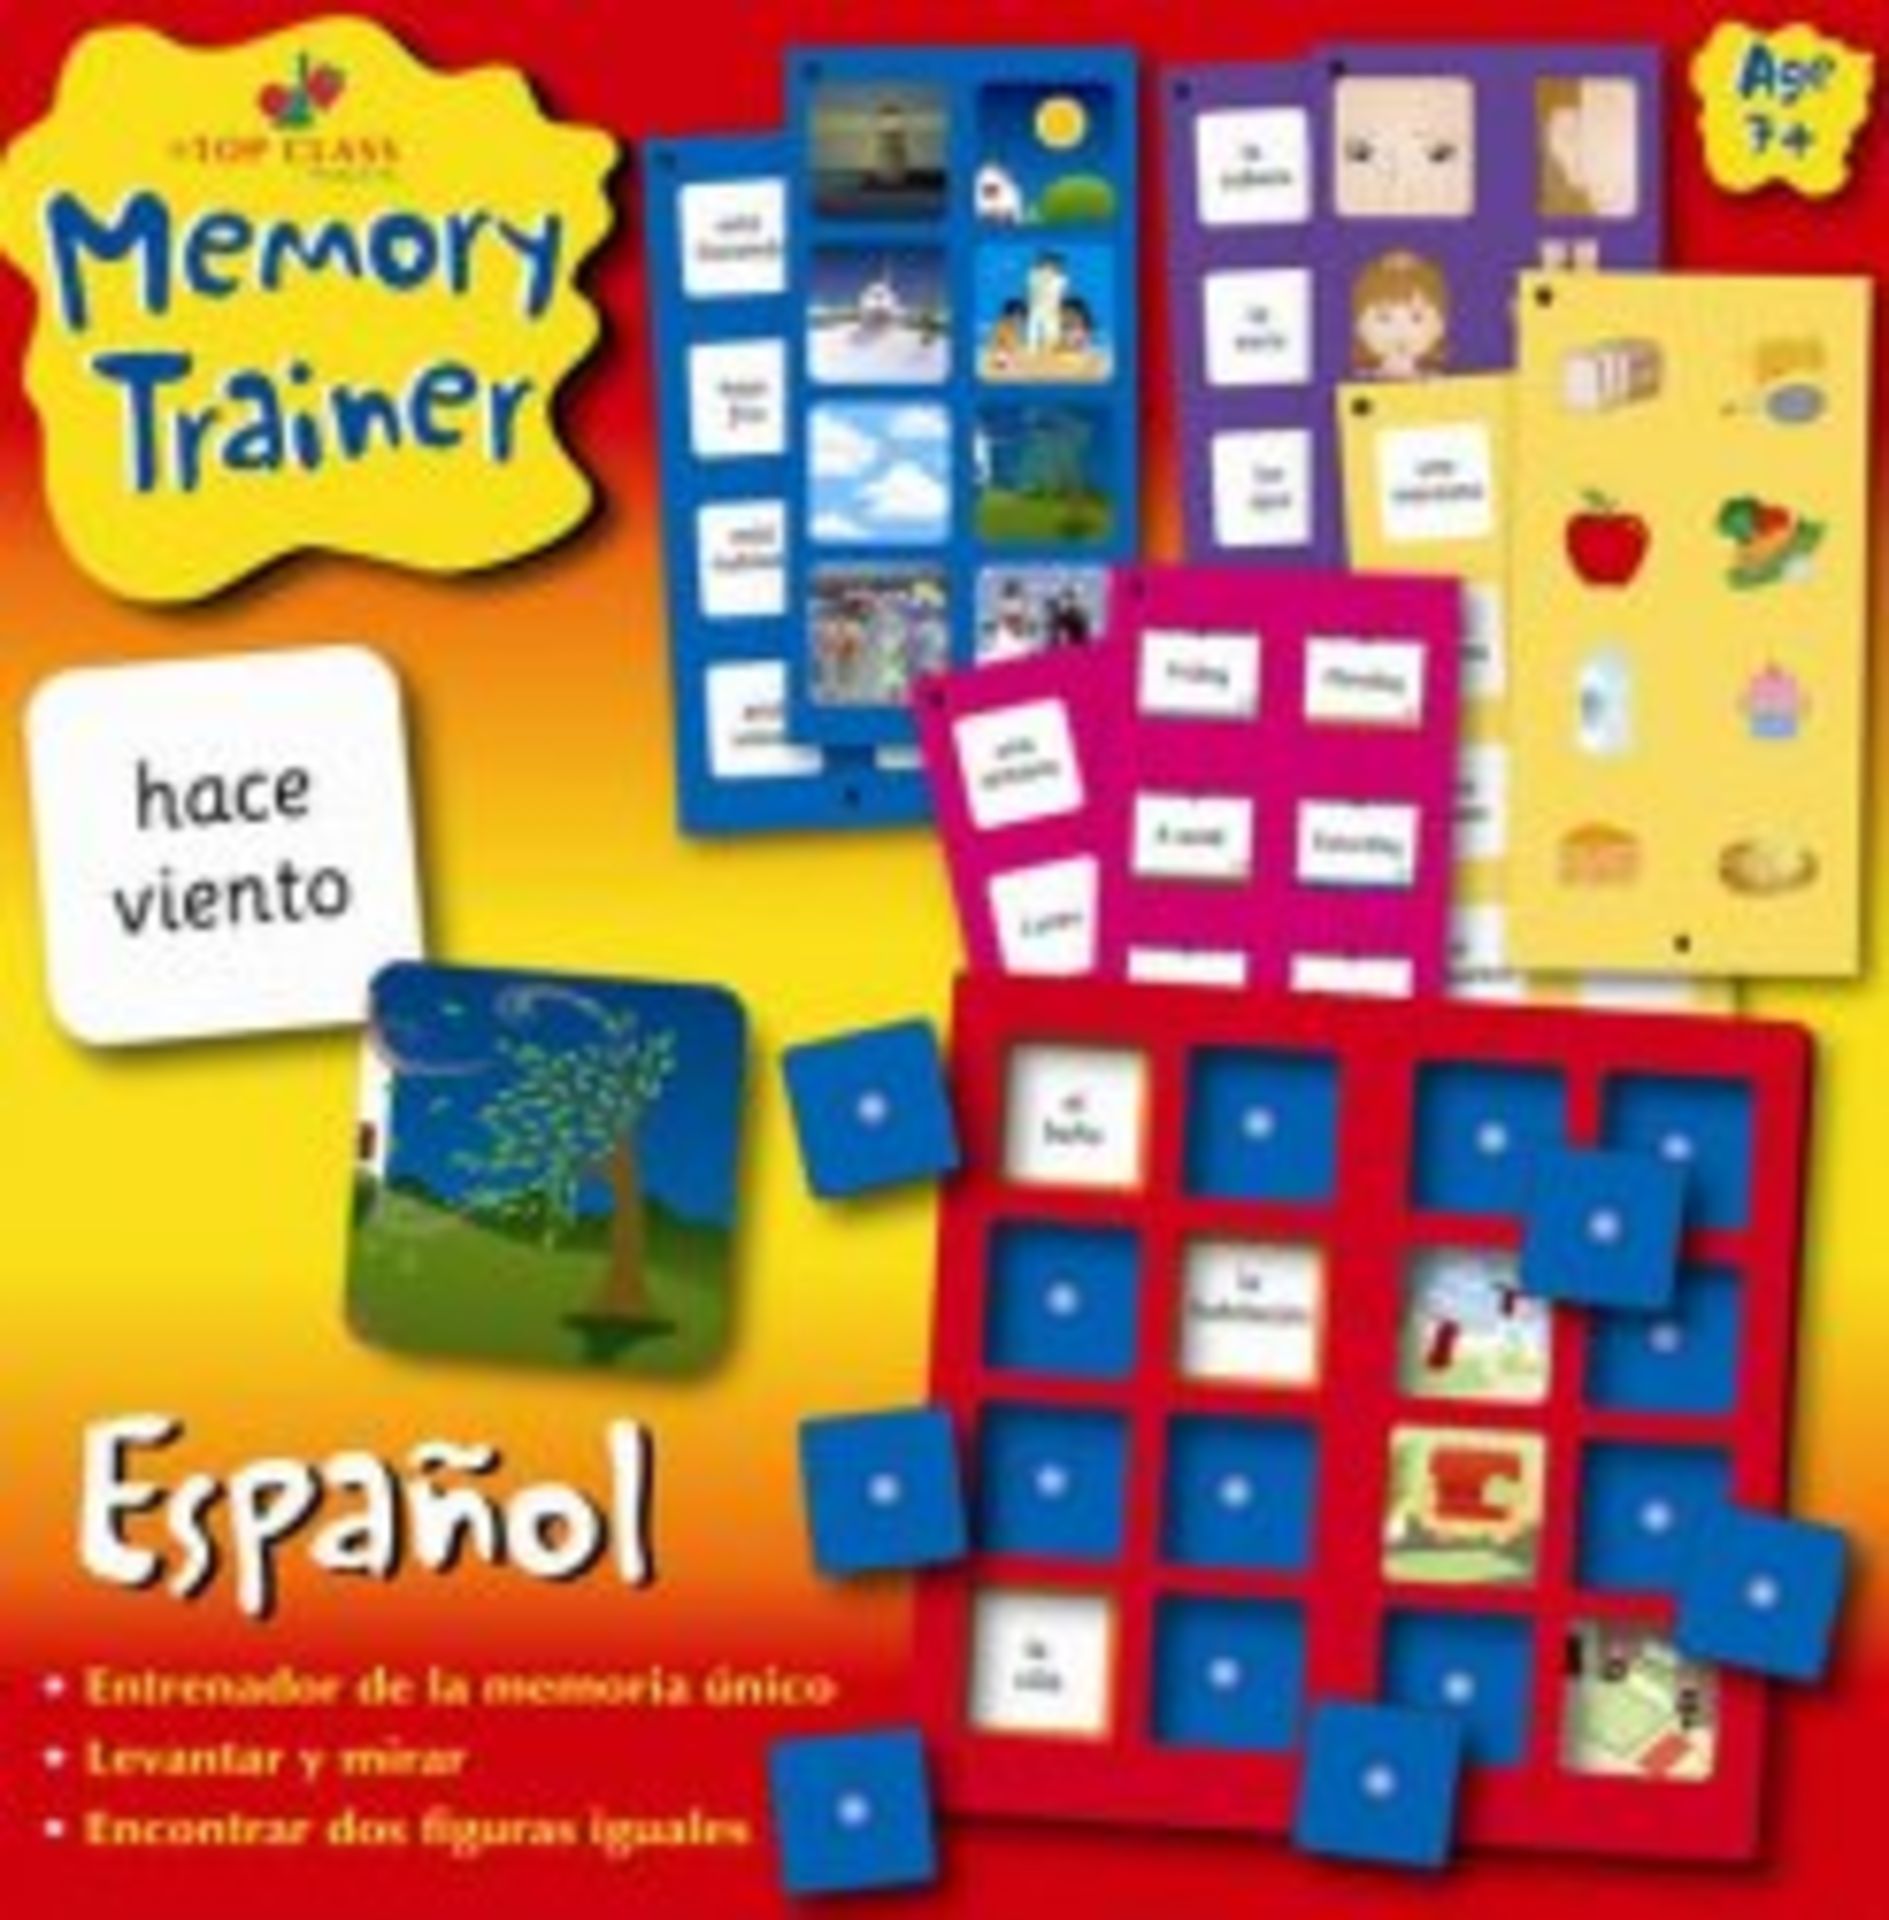 V *TRADE QTY* Brand New Top Class Lift & Look Memory Trainer Espanol ISP £20.99 (Little Linguist)